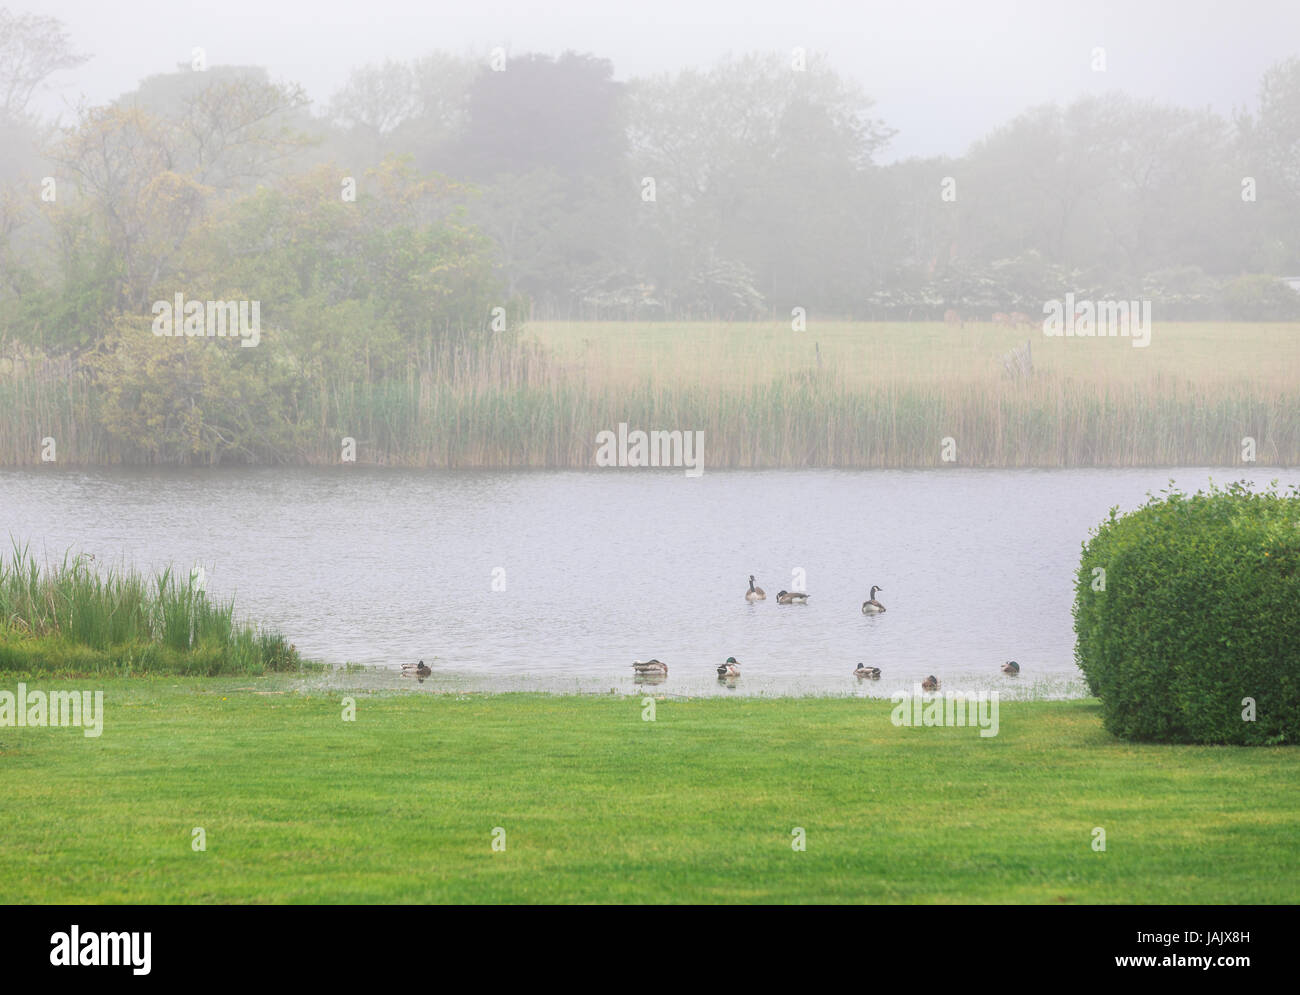 foggy day on an inland pond with ducks and deer. Stock Photo